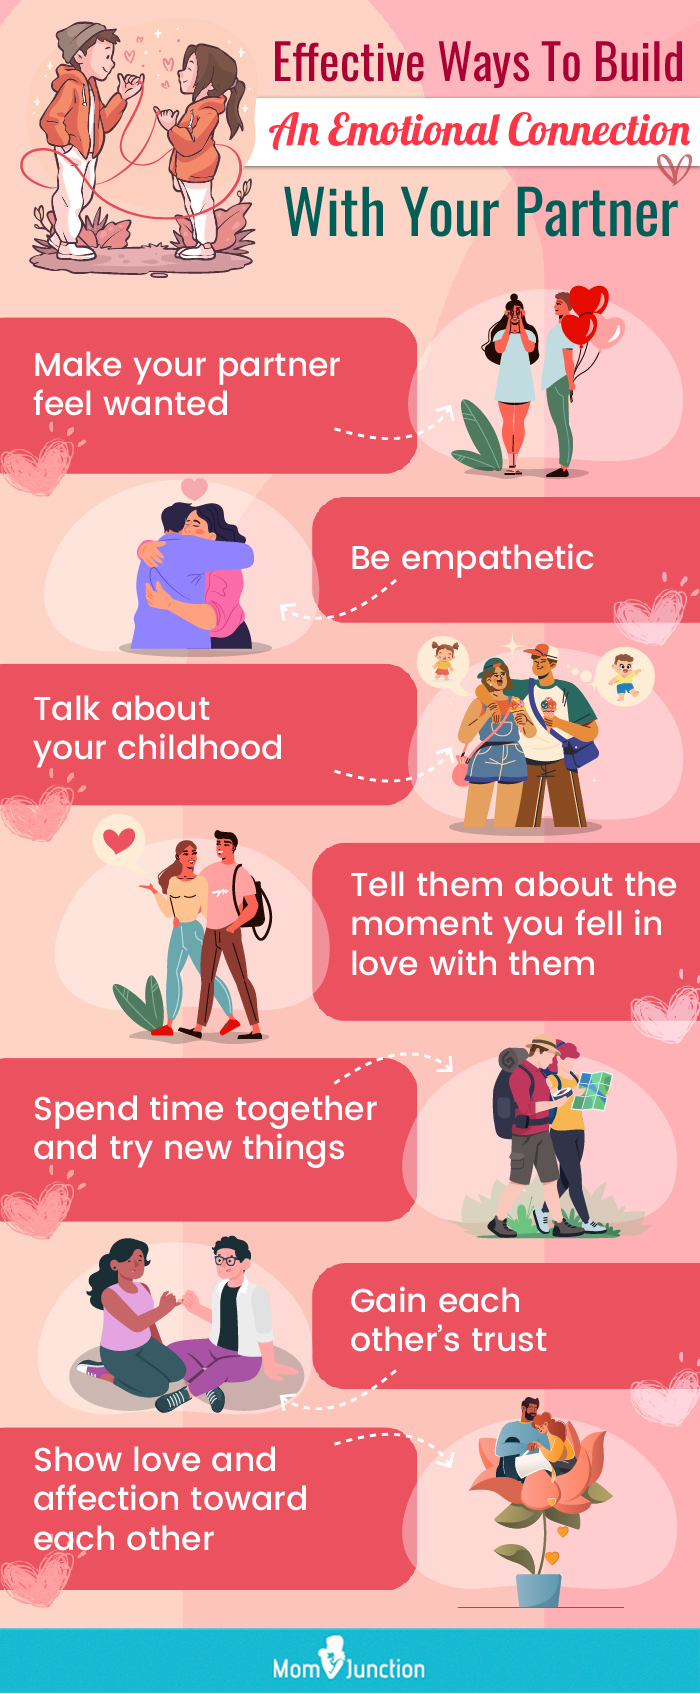 effective ways for building an emotional connection with your partner (infographic)